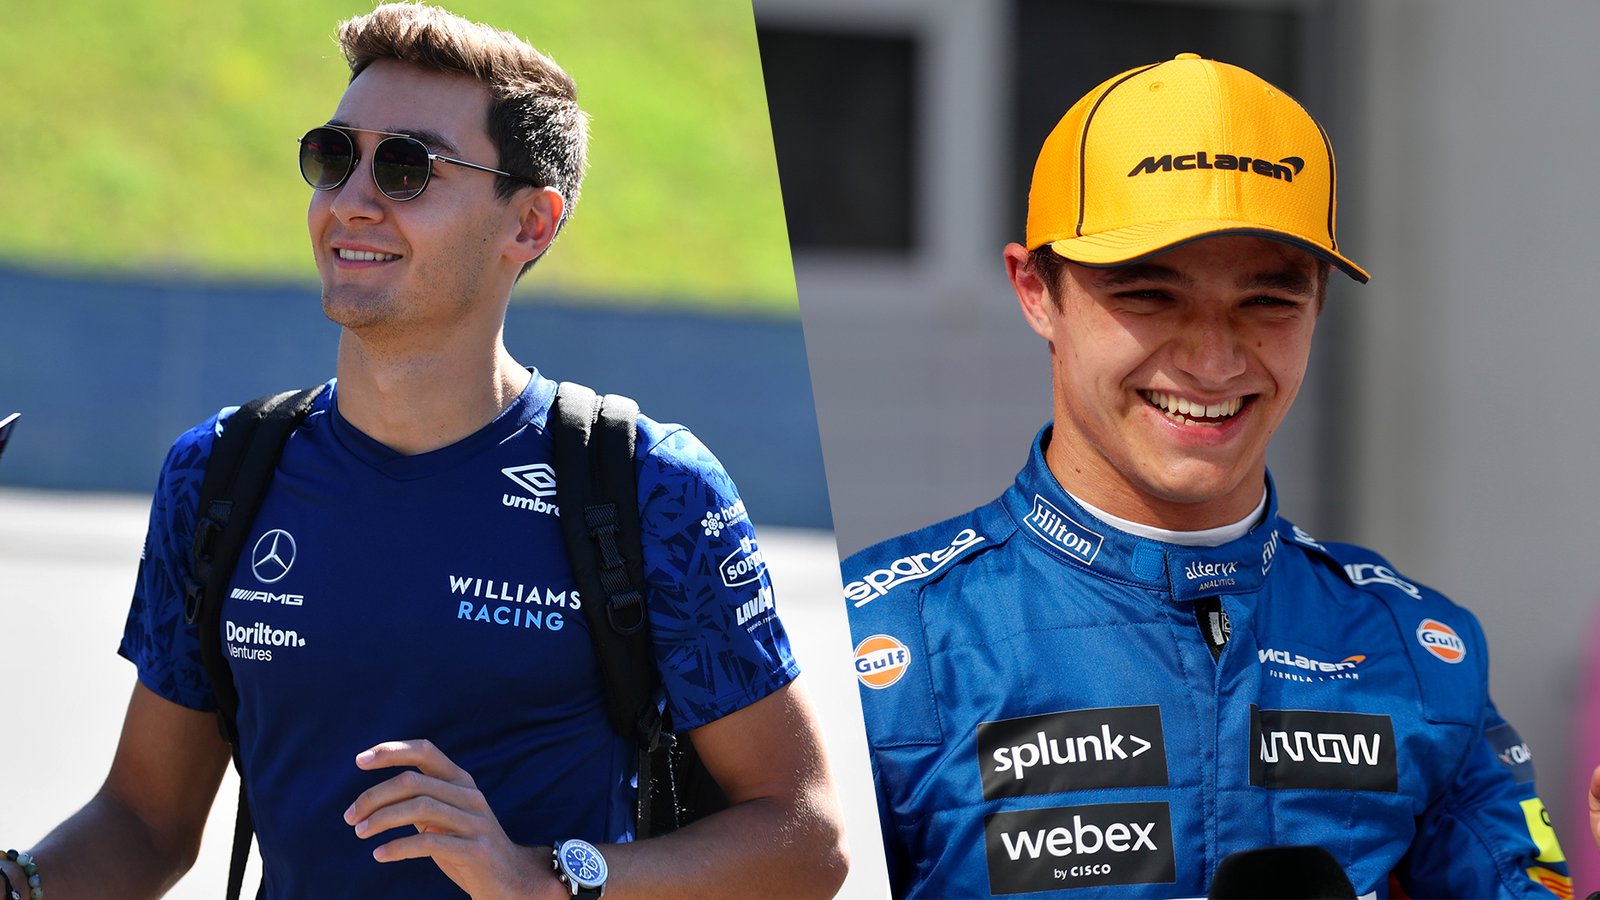 British GP: George Russell and Lando Norris proving star F1 potential as they wait for race-winning chances